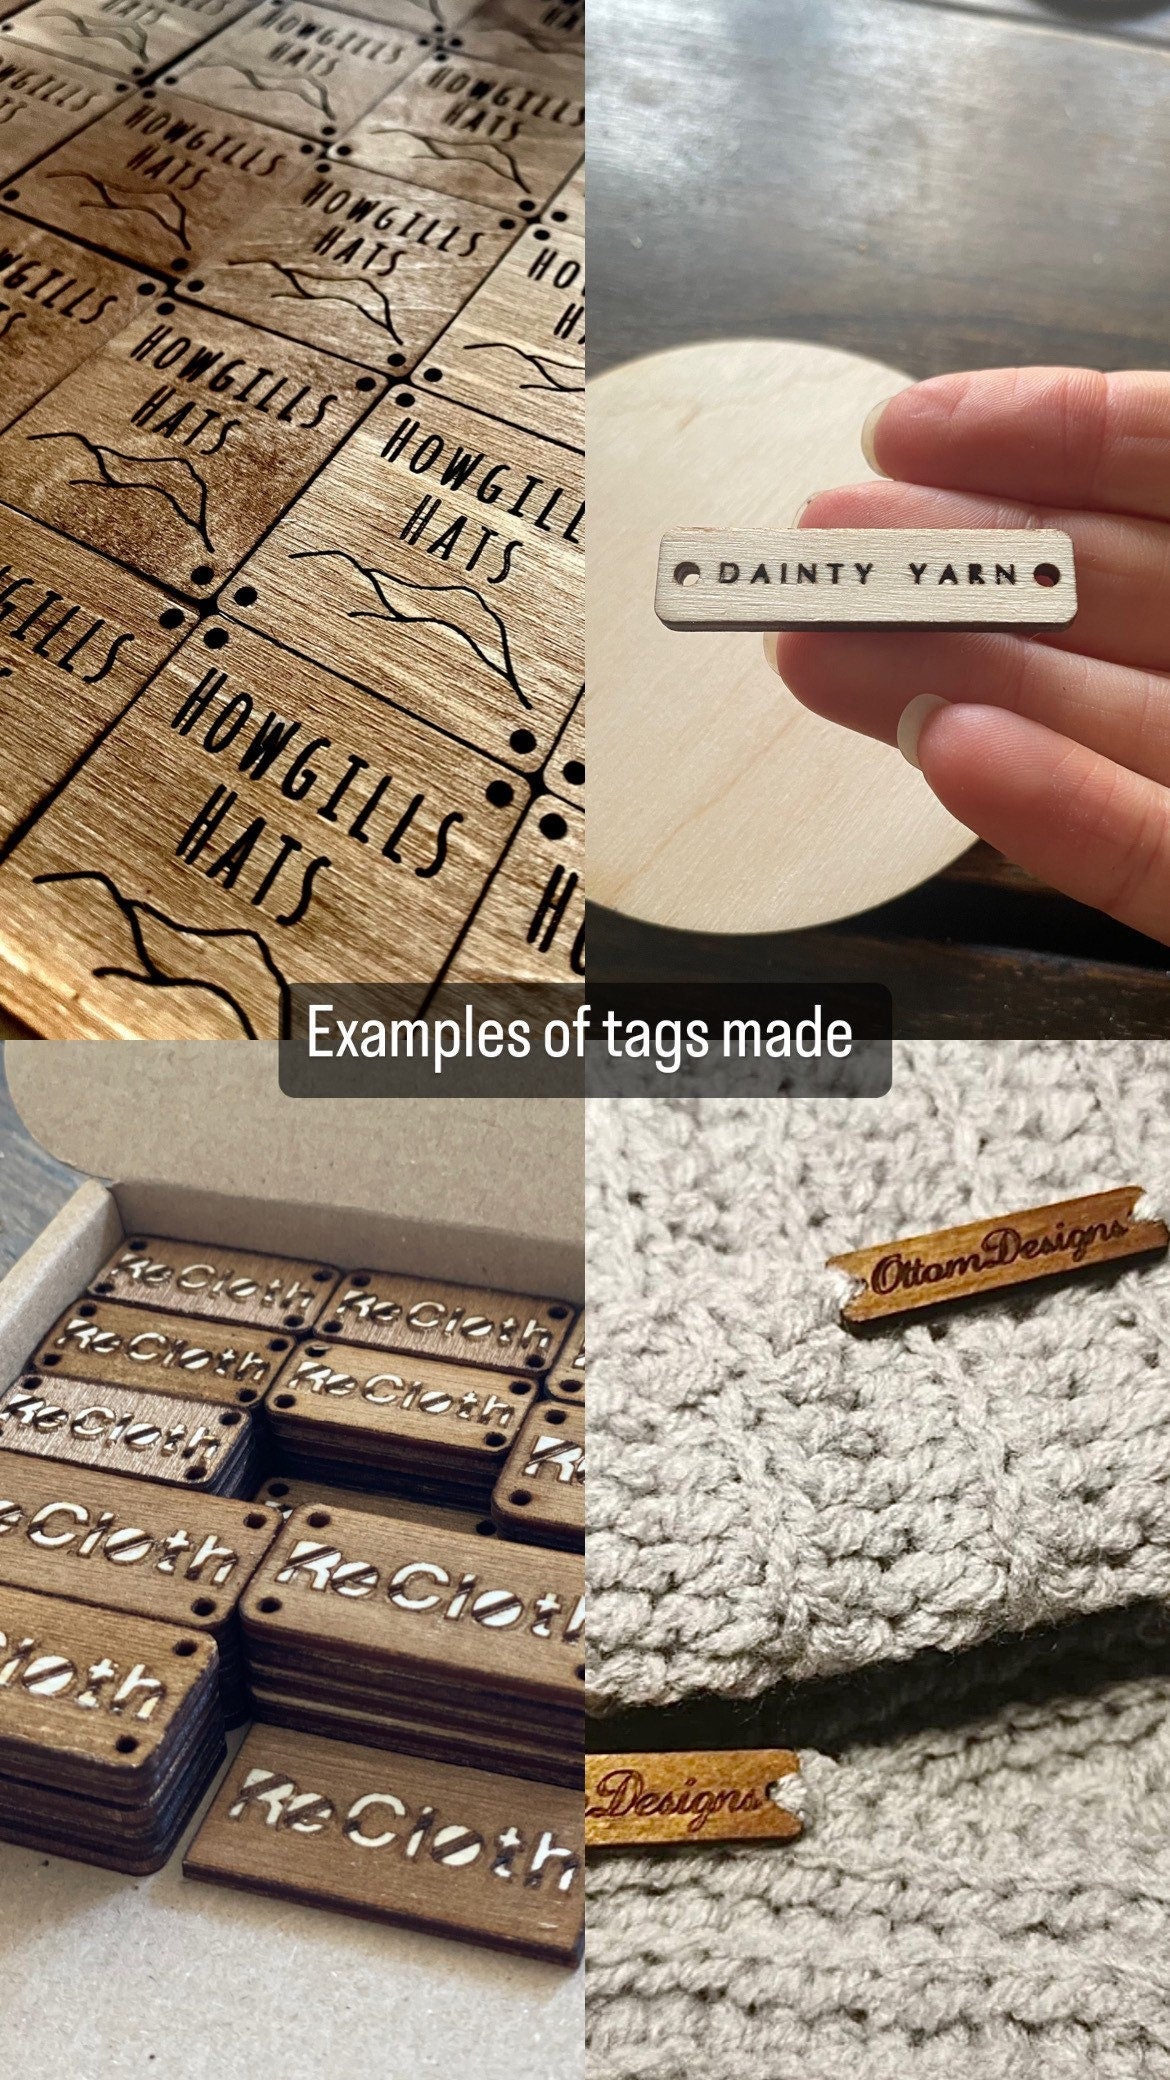 40x40mm Crochet Tags / Knitting Tags | Clothing Tags Custom or Knitting Accessories | Wooden Tags / Personalized Label Tags